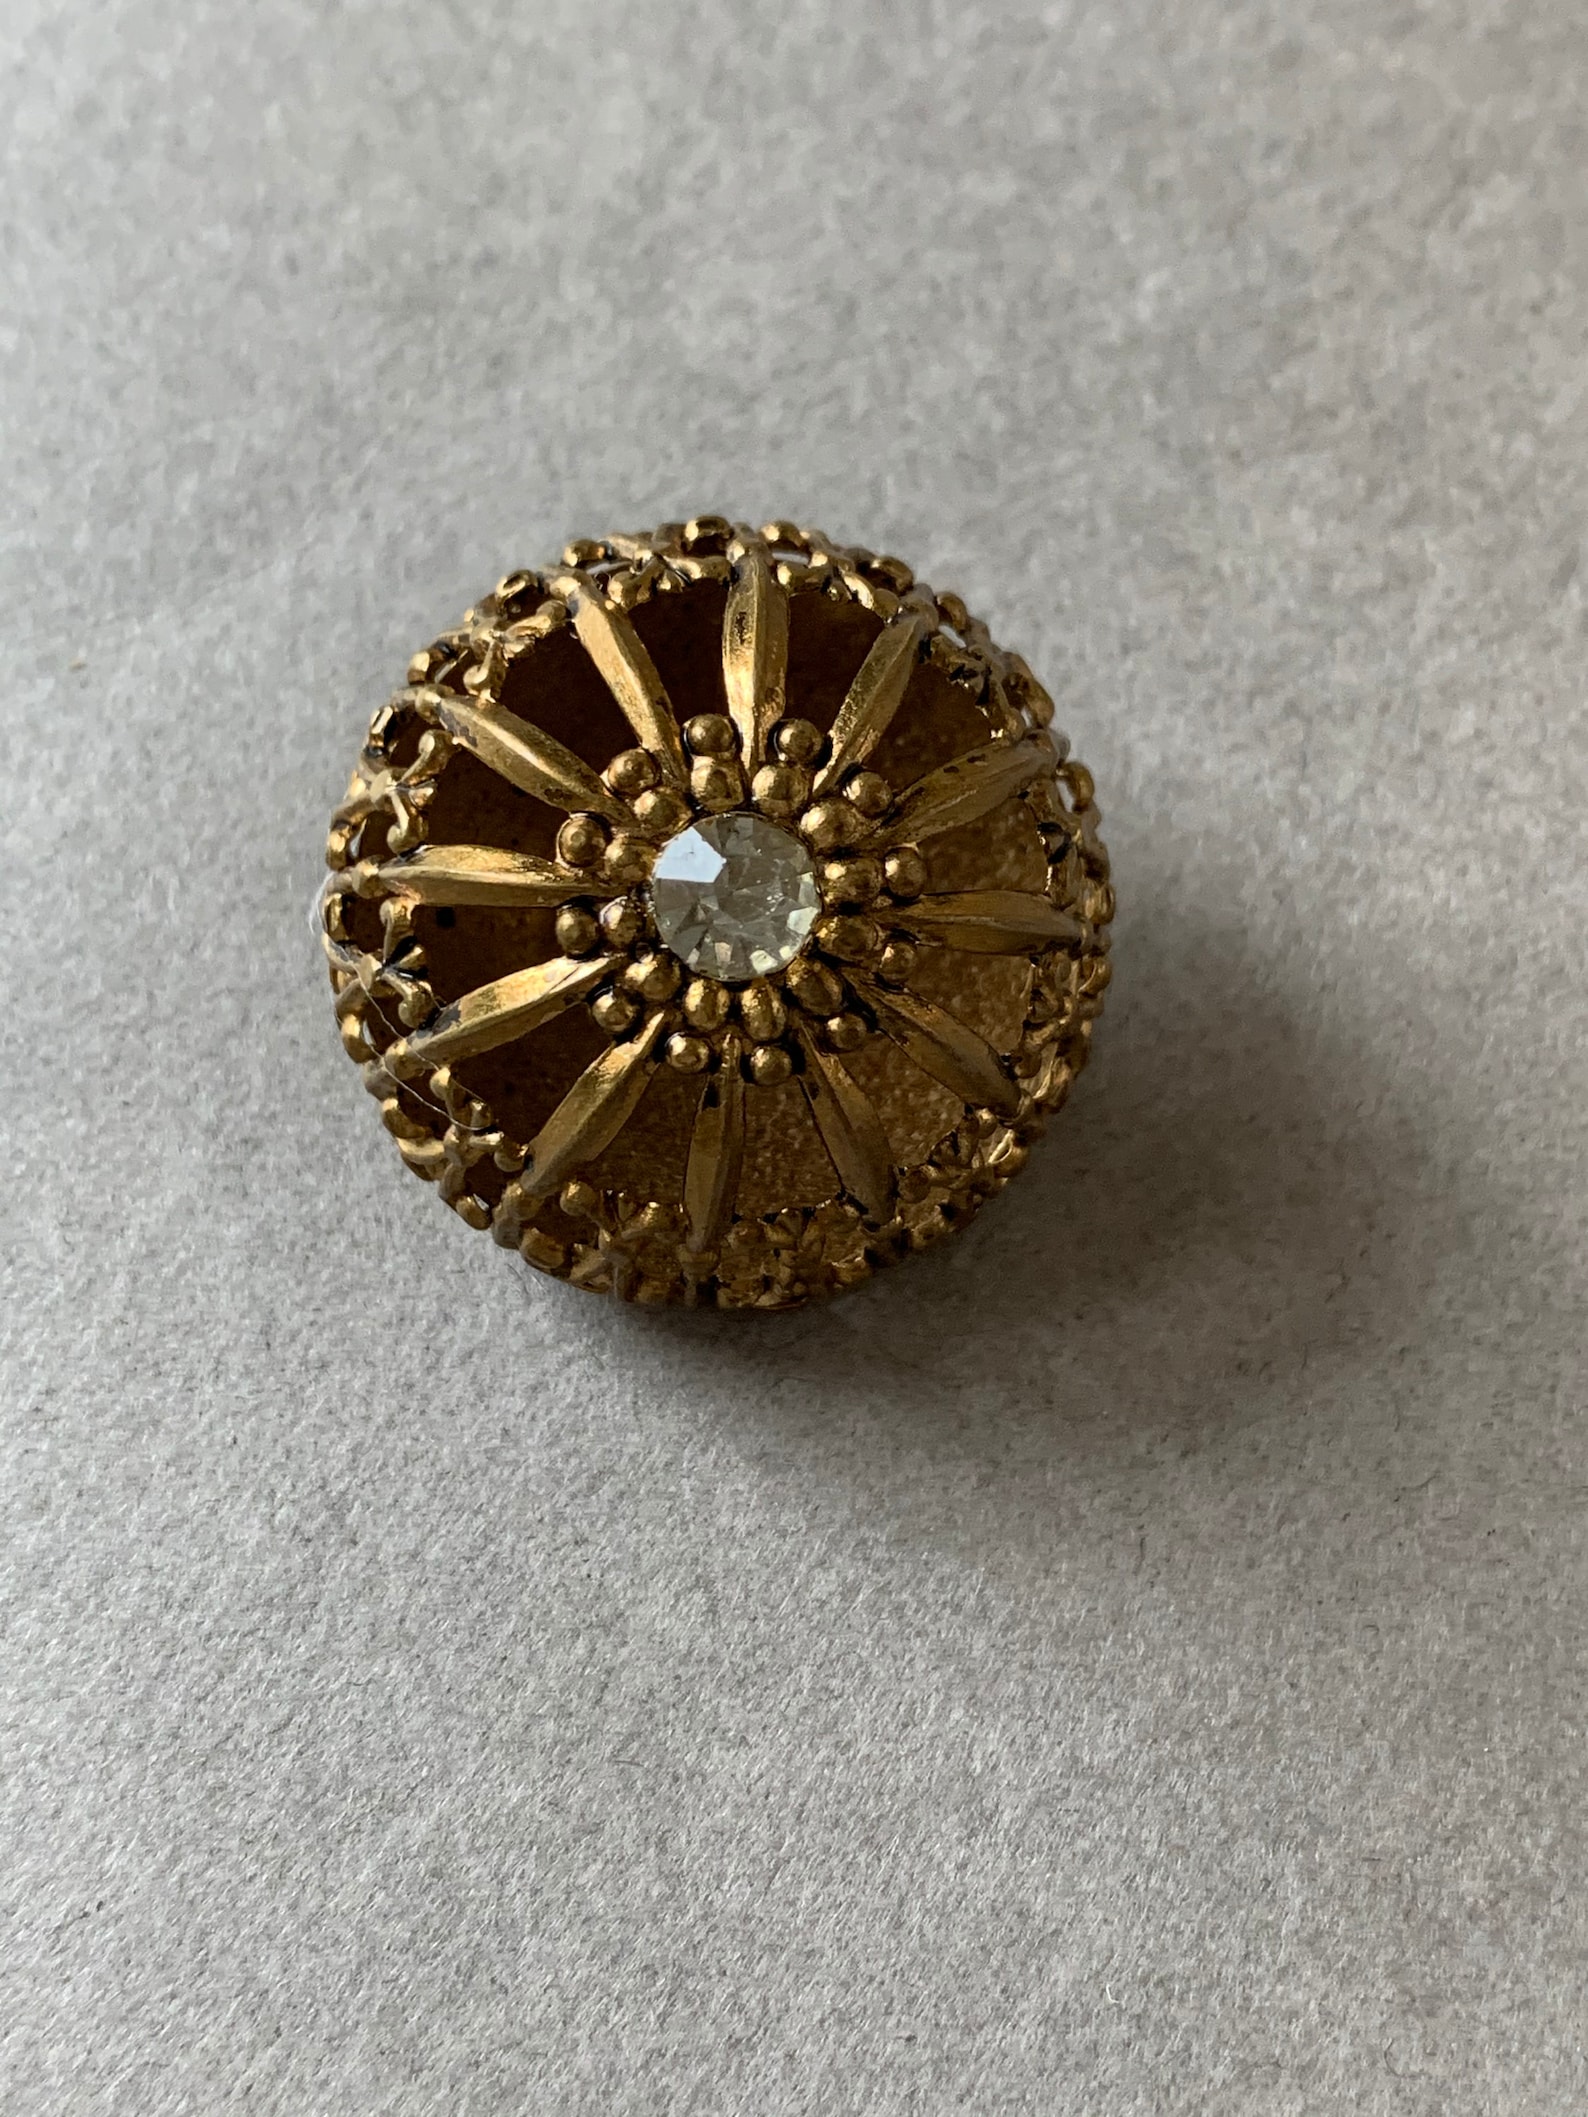 BUTTON METAL VINTAGE, Metal Domed Collector Button With Rhinestone ...